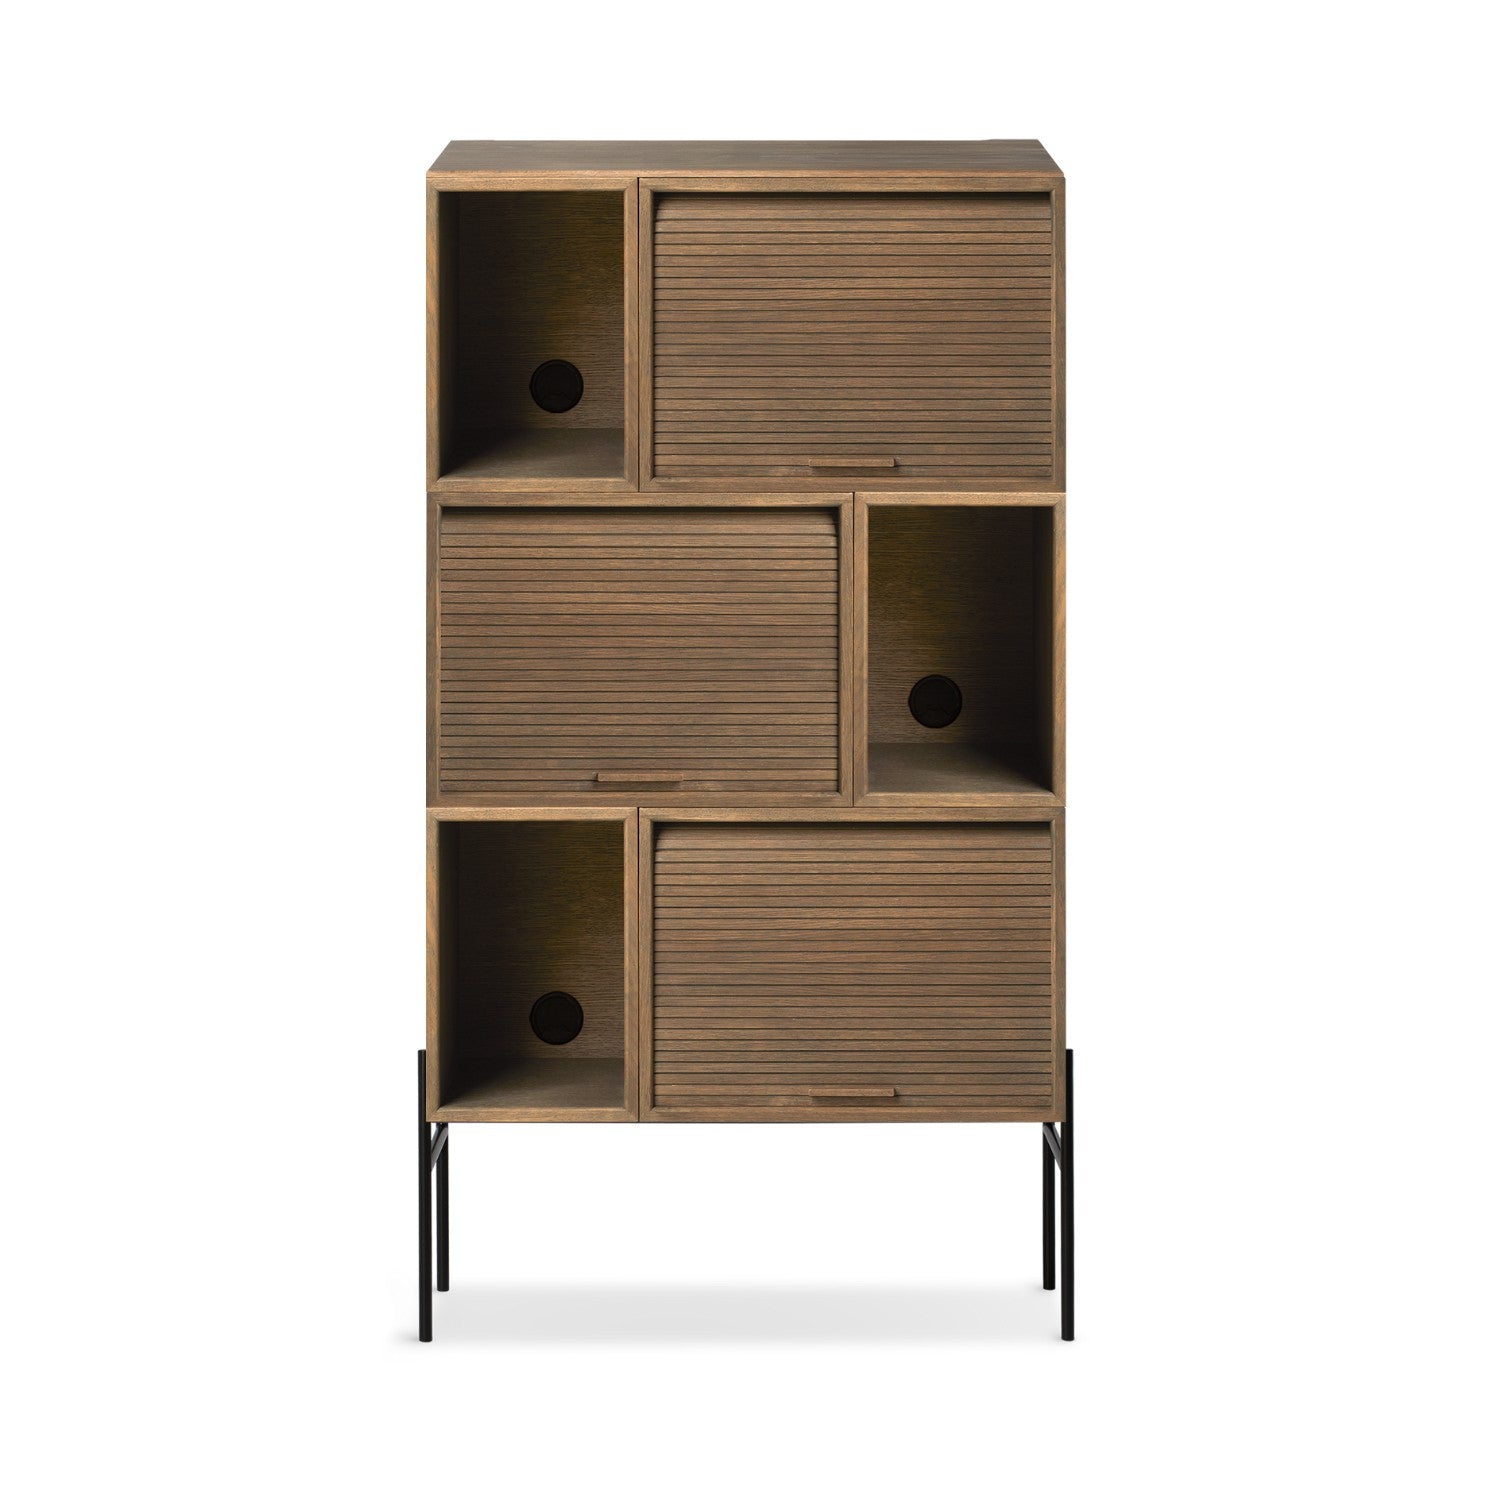 HIFIVE TALL - Cabinet